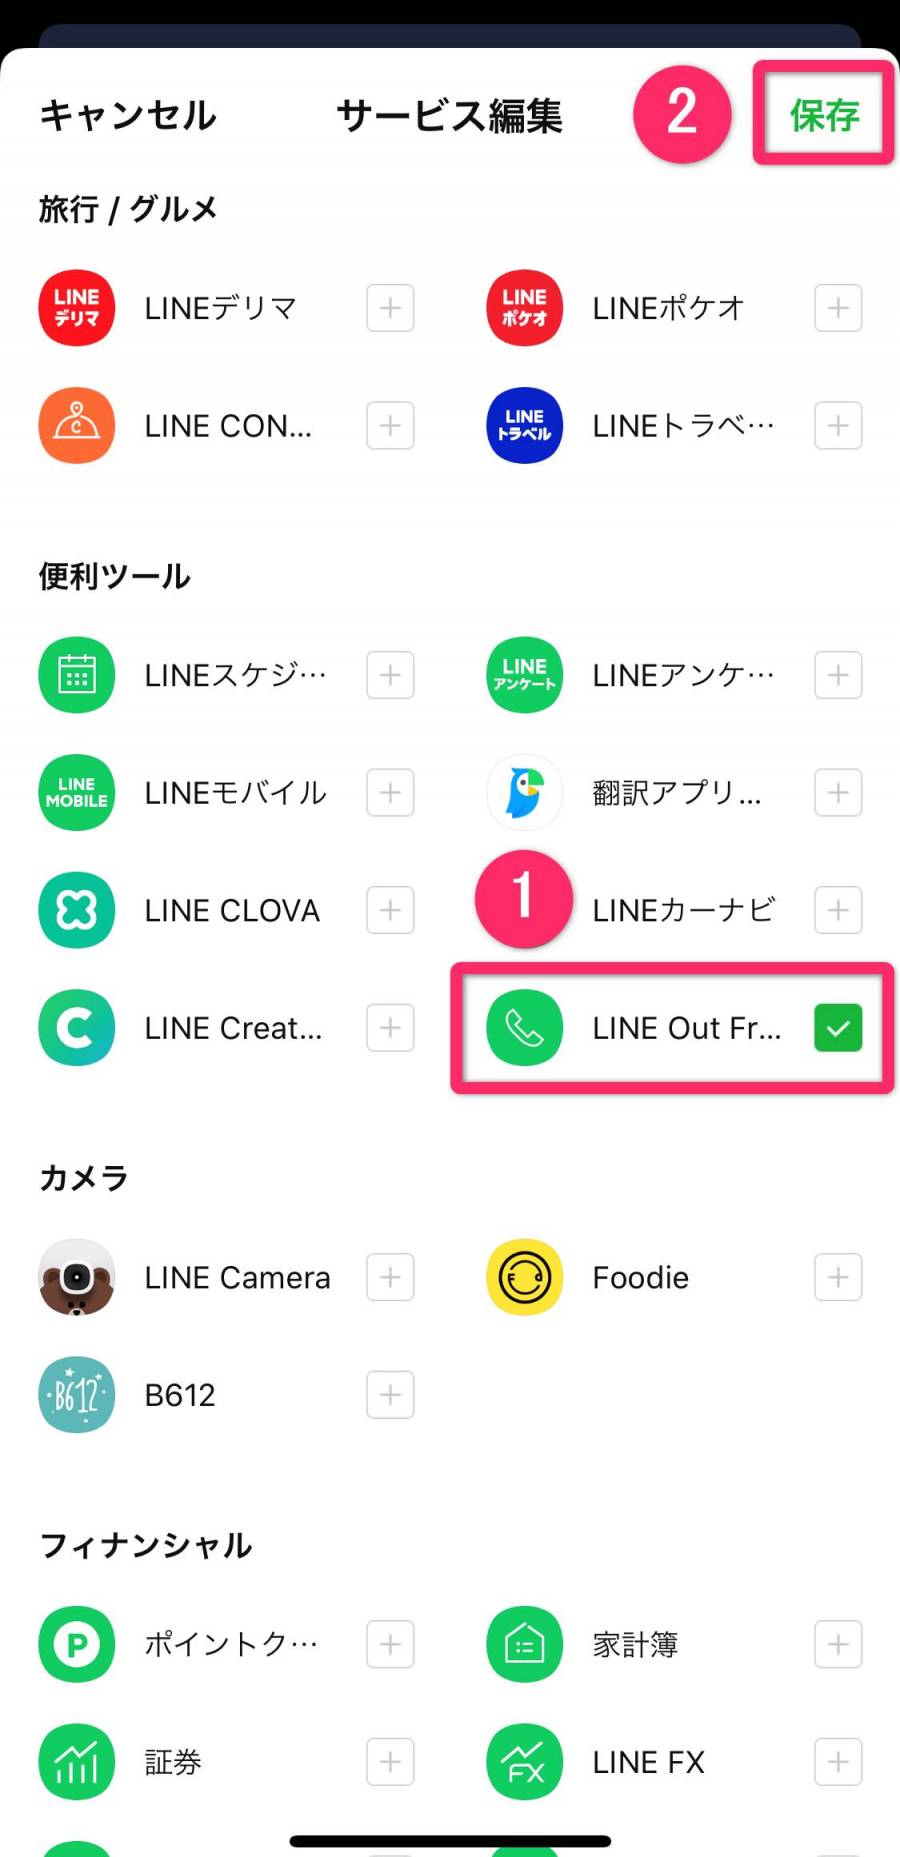 LINE OUT Free 追加